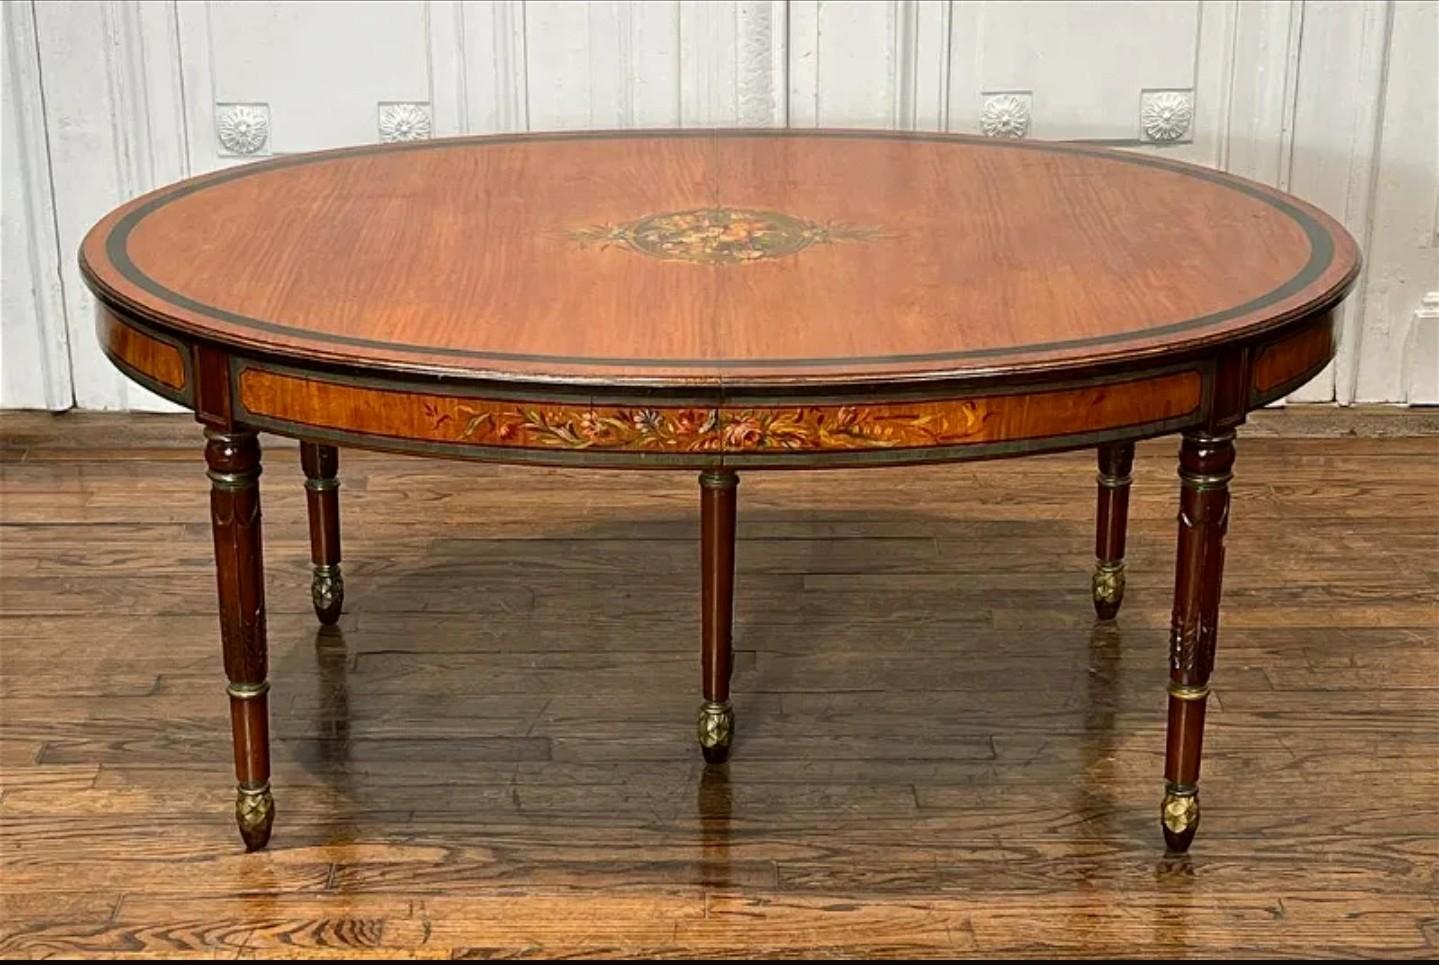 A one-of-a-kind Edwardian period (1901-1910) English Adam taste paint decorated satinwood extension dining breakfast table, professionally converted to a cocktail table, with reduced legs.

Exquisitely hand-crafted in the early 20th century, later